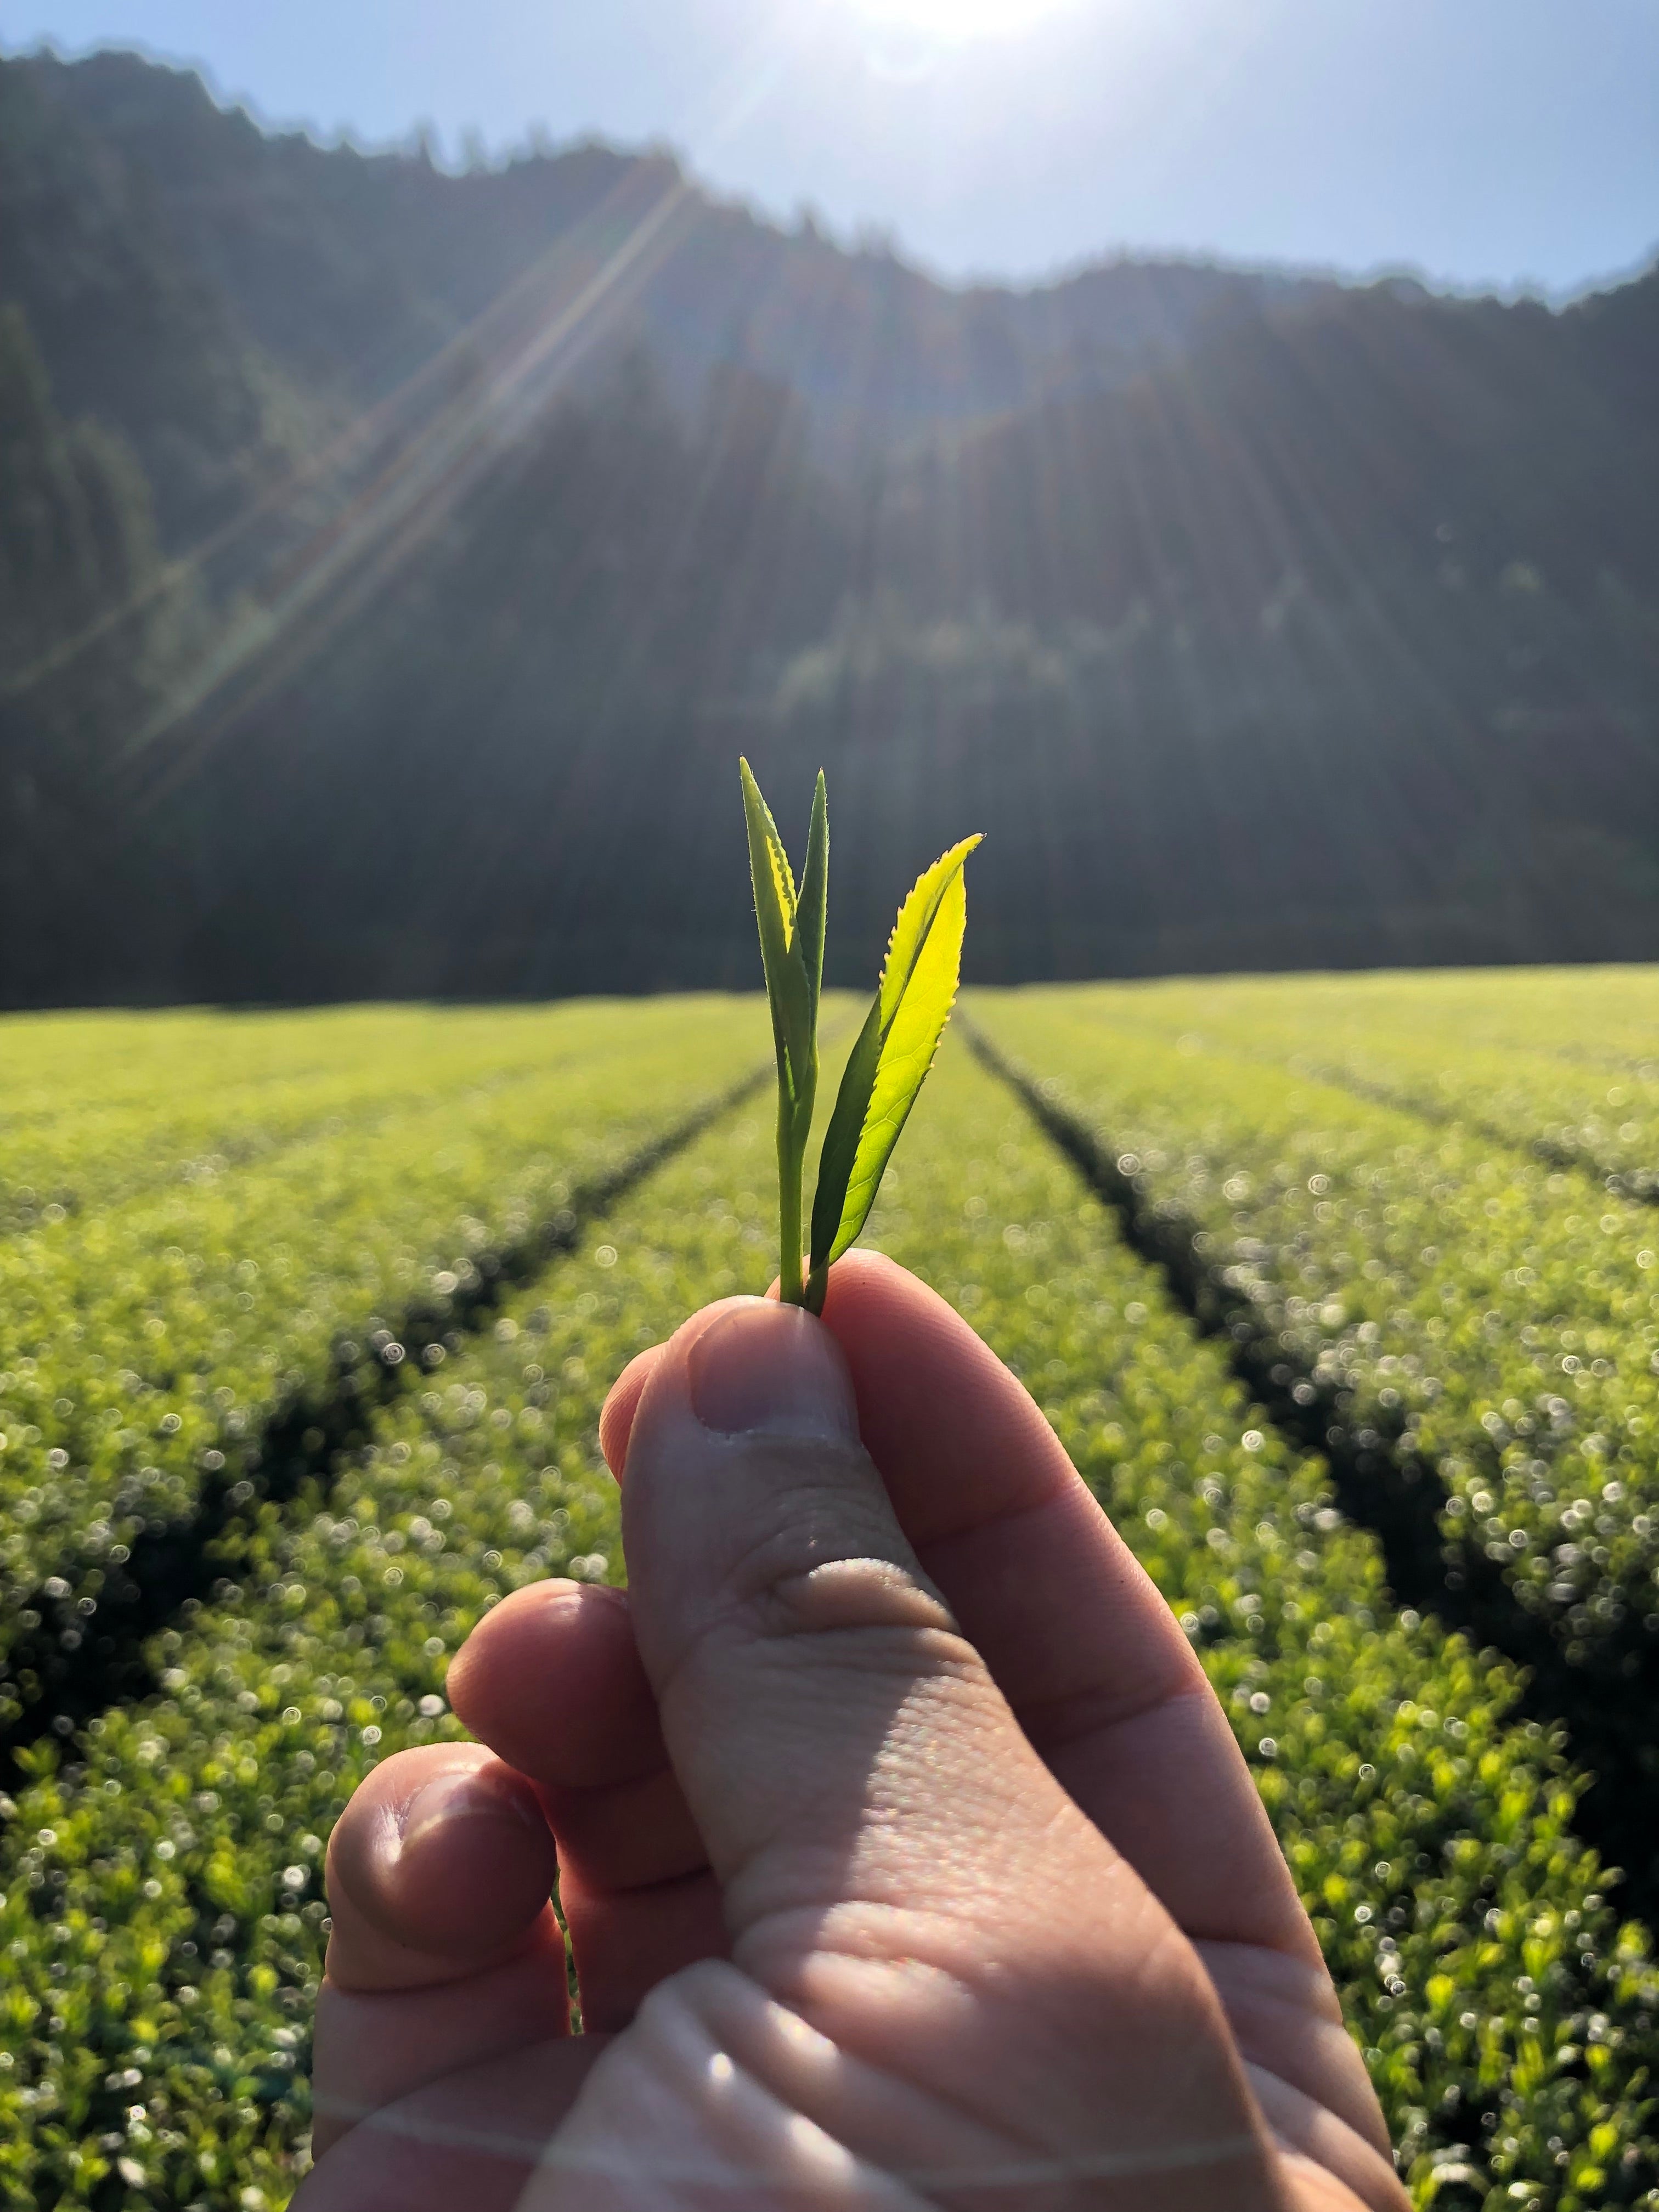 A photo of a hand holding a sprig of green tea leaves in the sunlight, in a green tea field with hills in the background